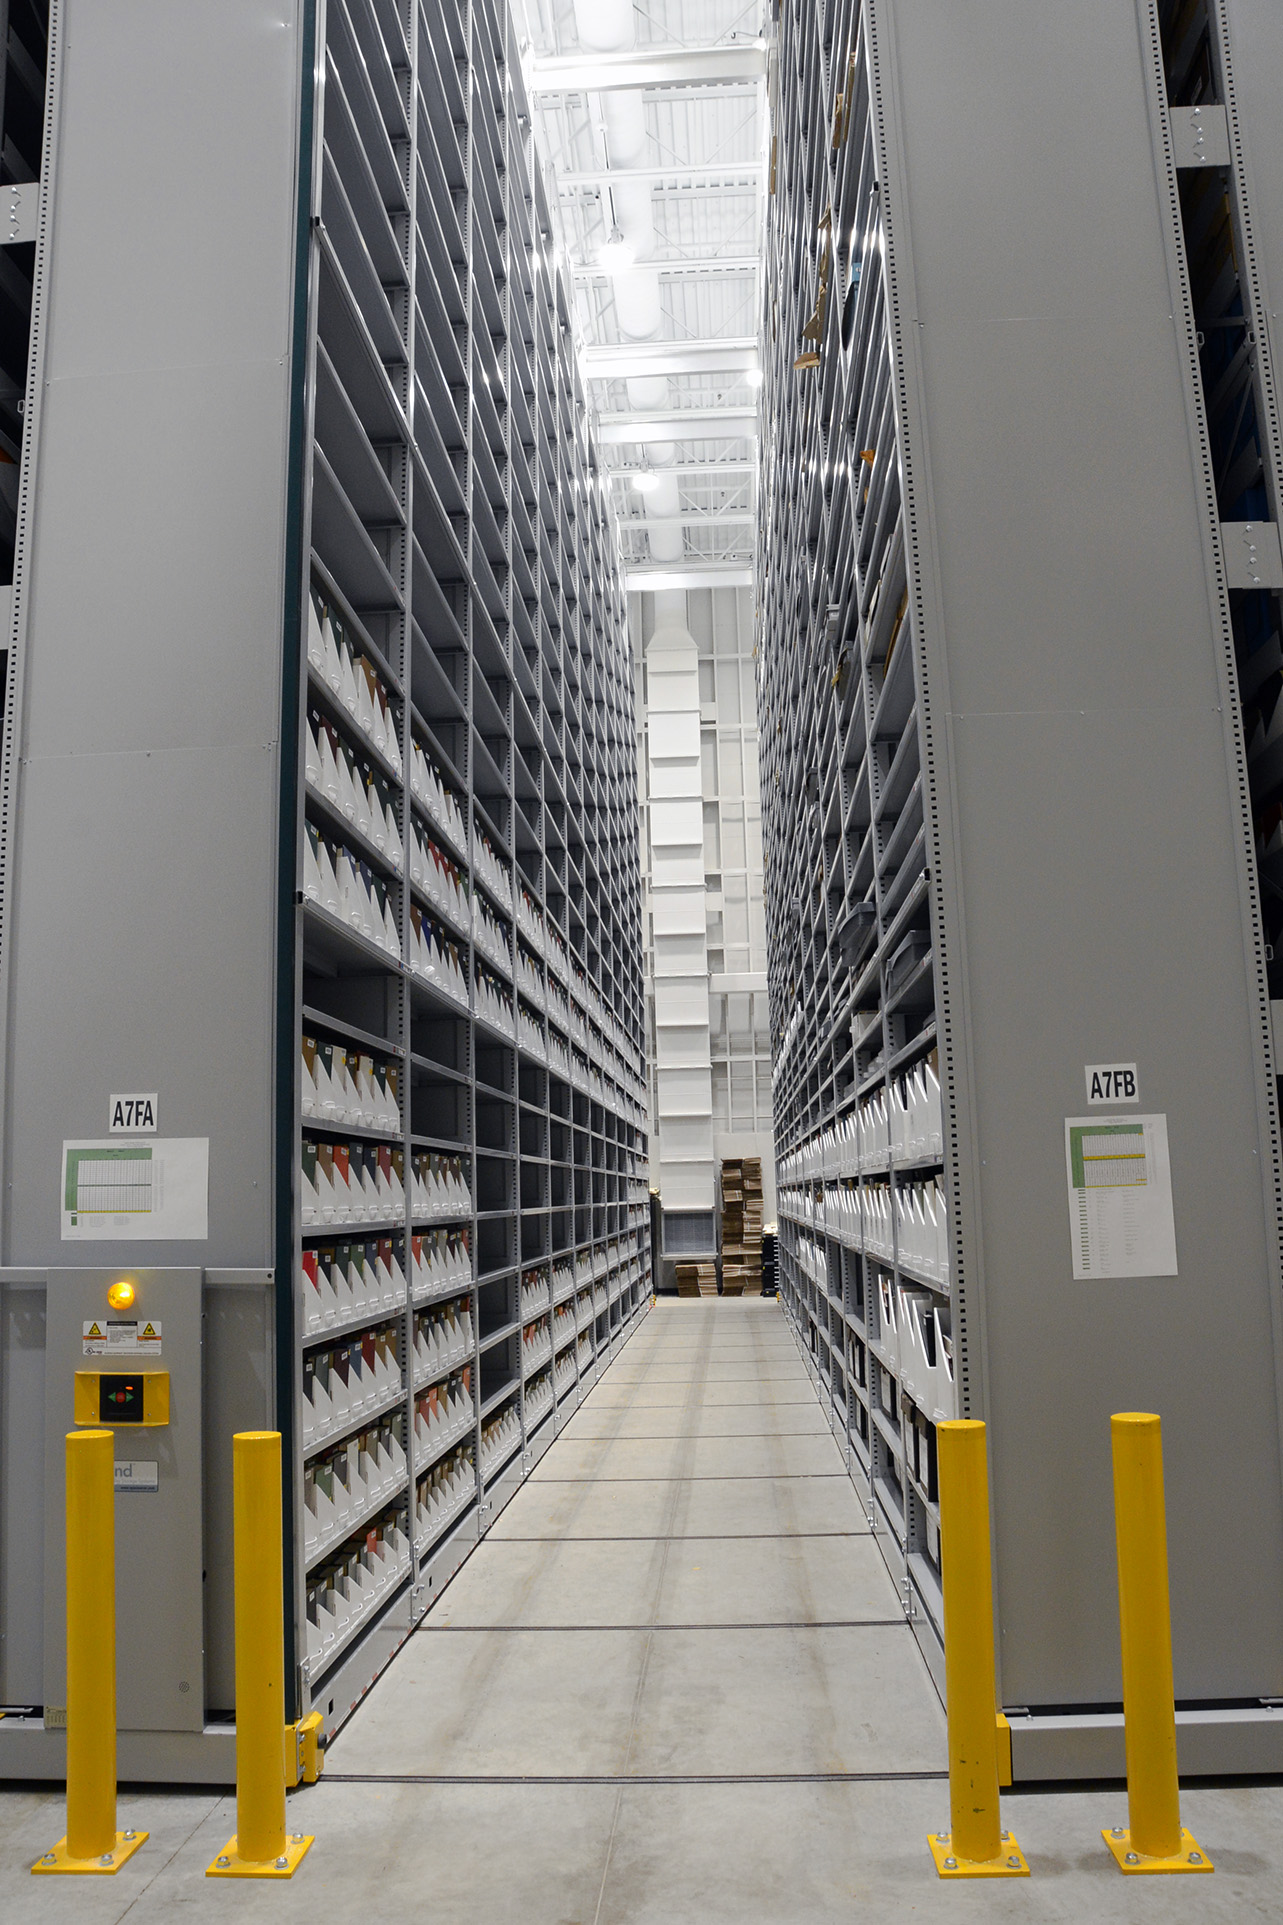 34 foot high archival mobile storage for off-site library book storage